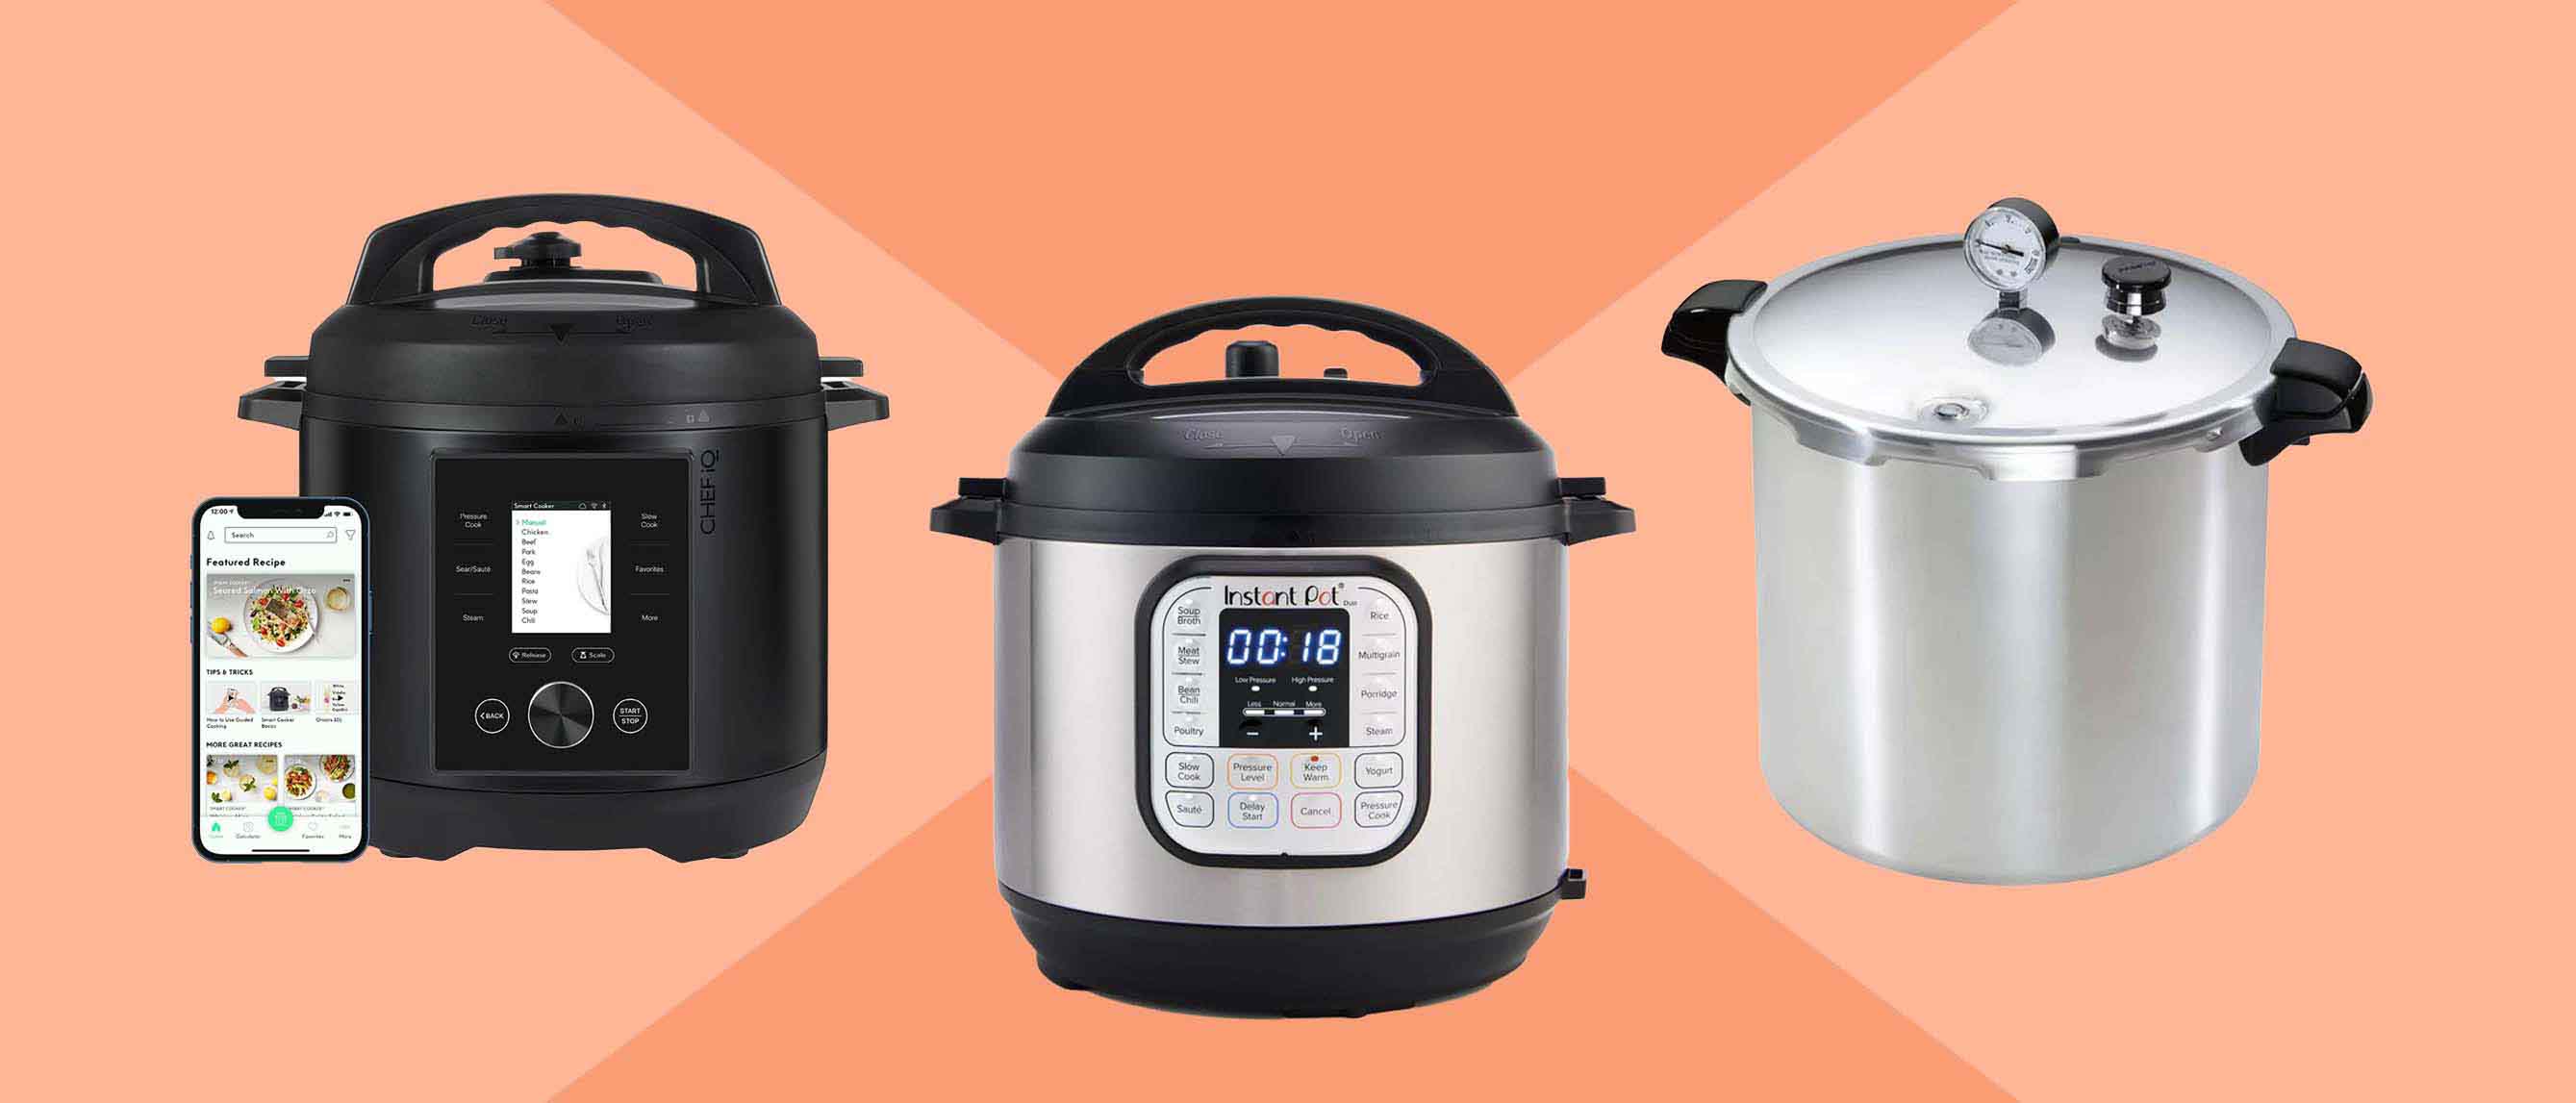 smart pressure cooker, instant pot, and traditional stovetop pressure cooker